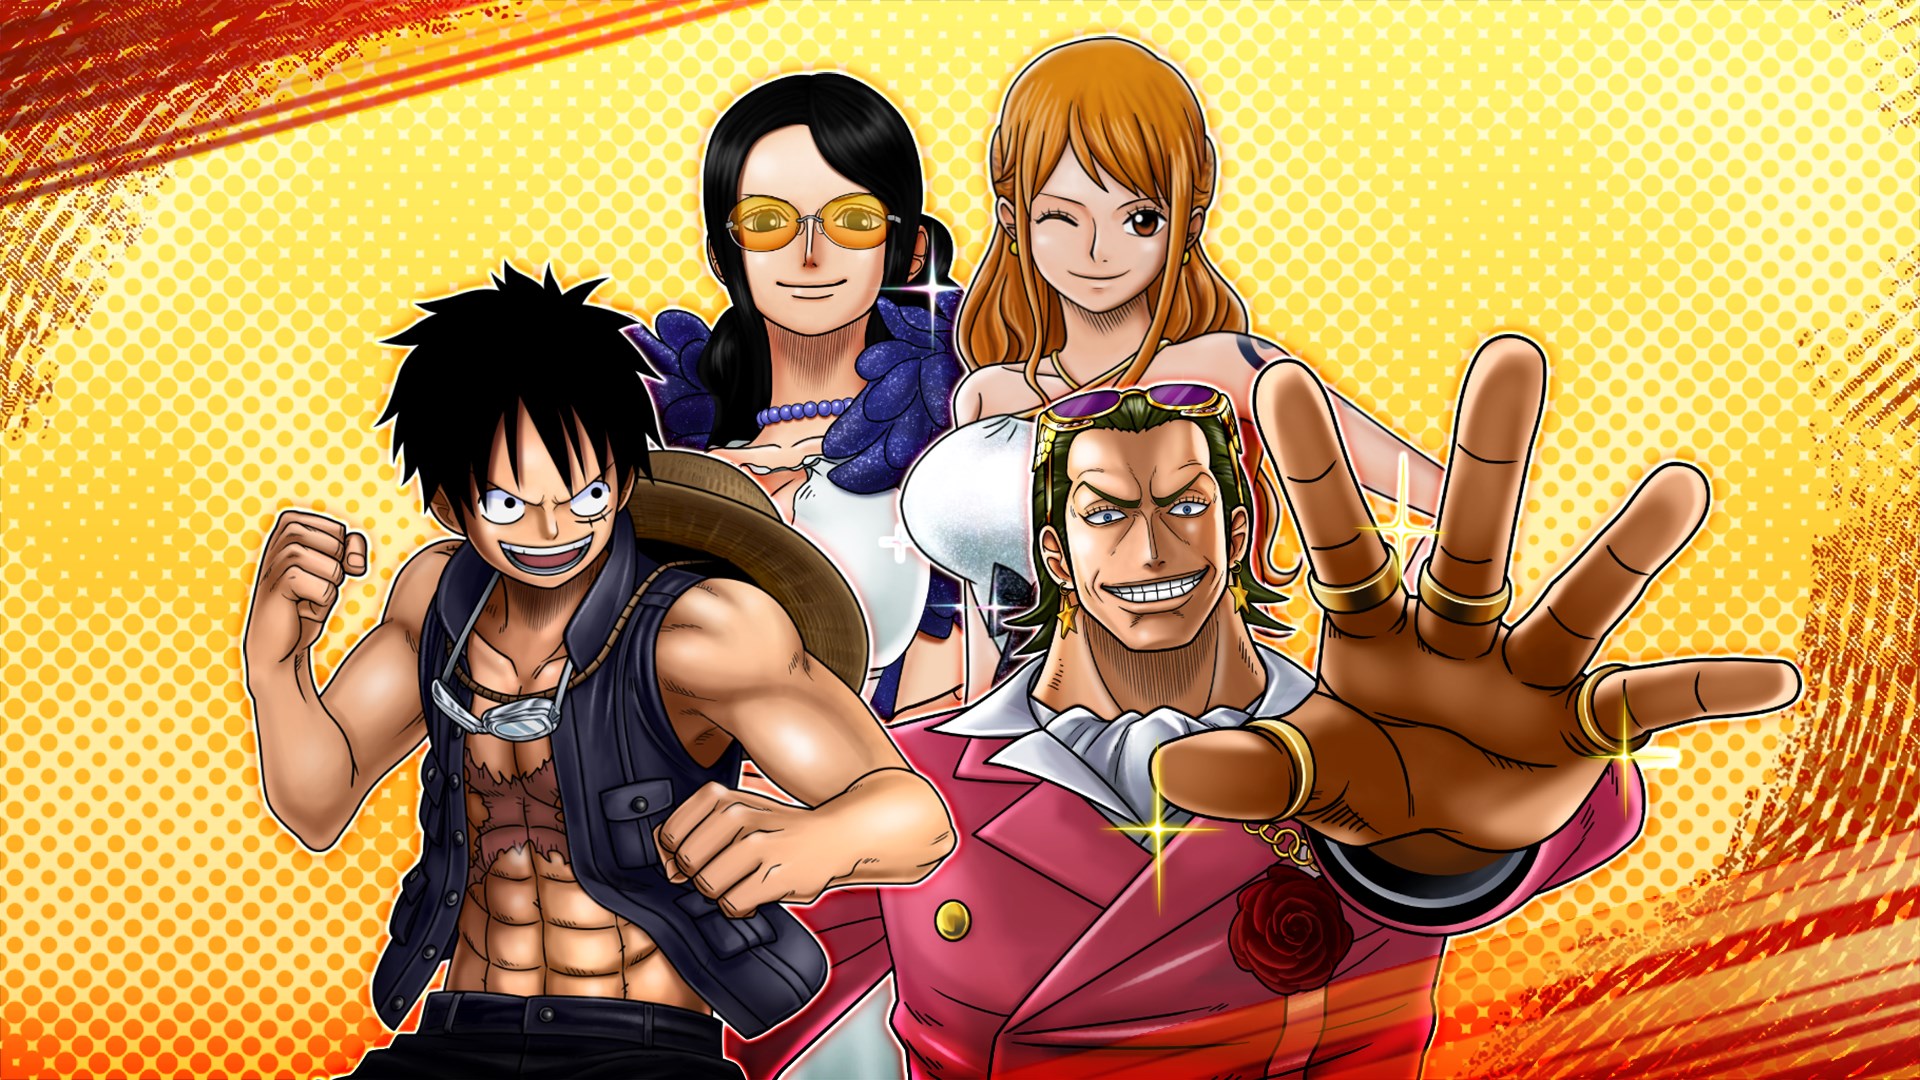 One Piece Burning Blood DLC Film Gold Pack Trailer [OFFICIAL